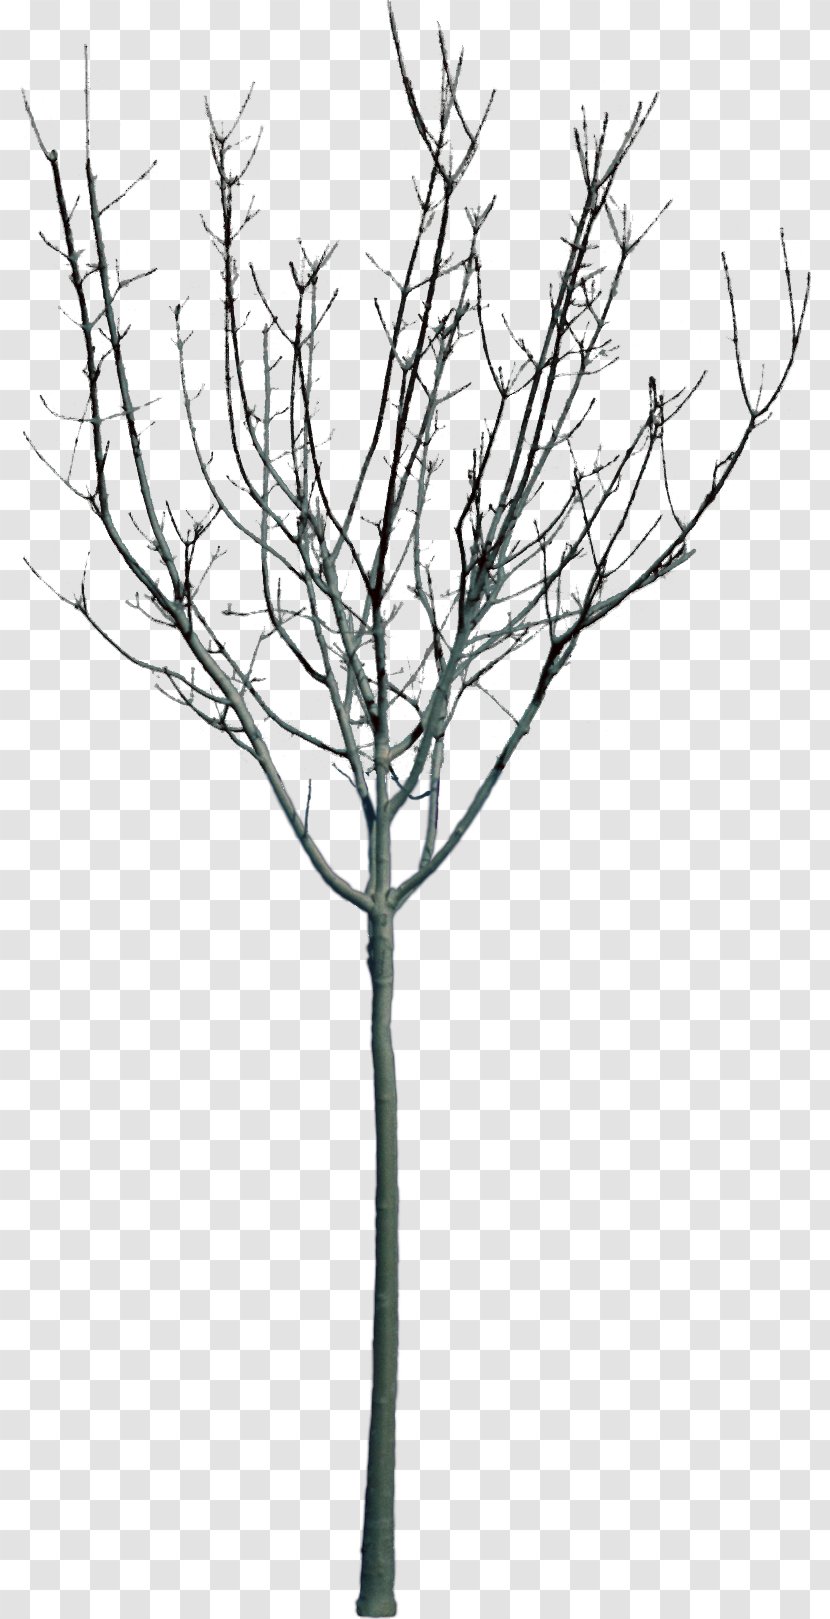 Woody Plant Parkeergarage Stadshuis Tree Branch - Bushes Transparent PNG